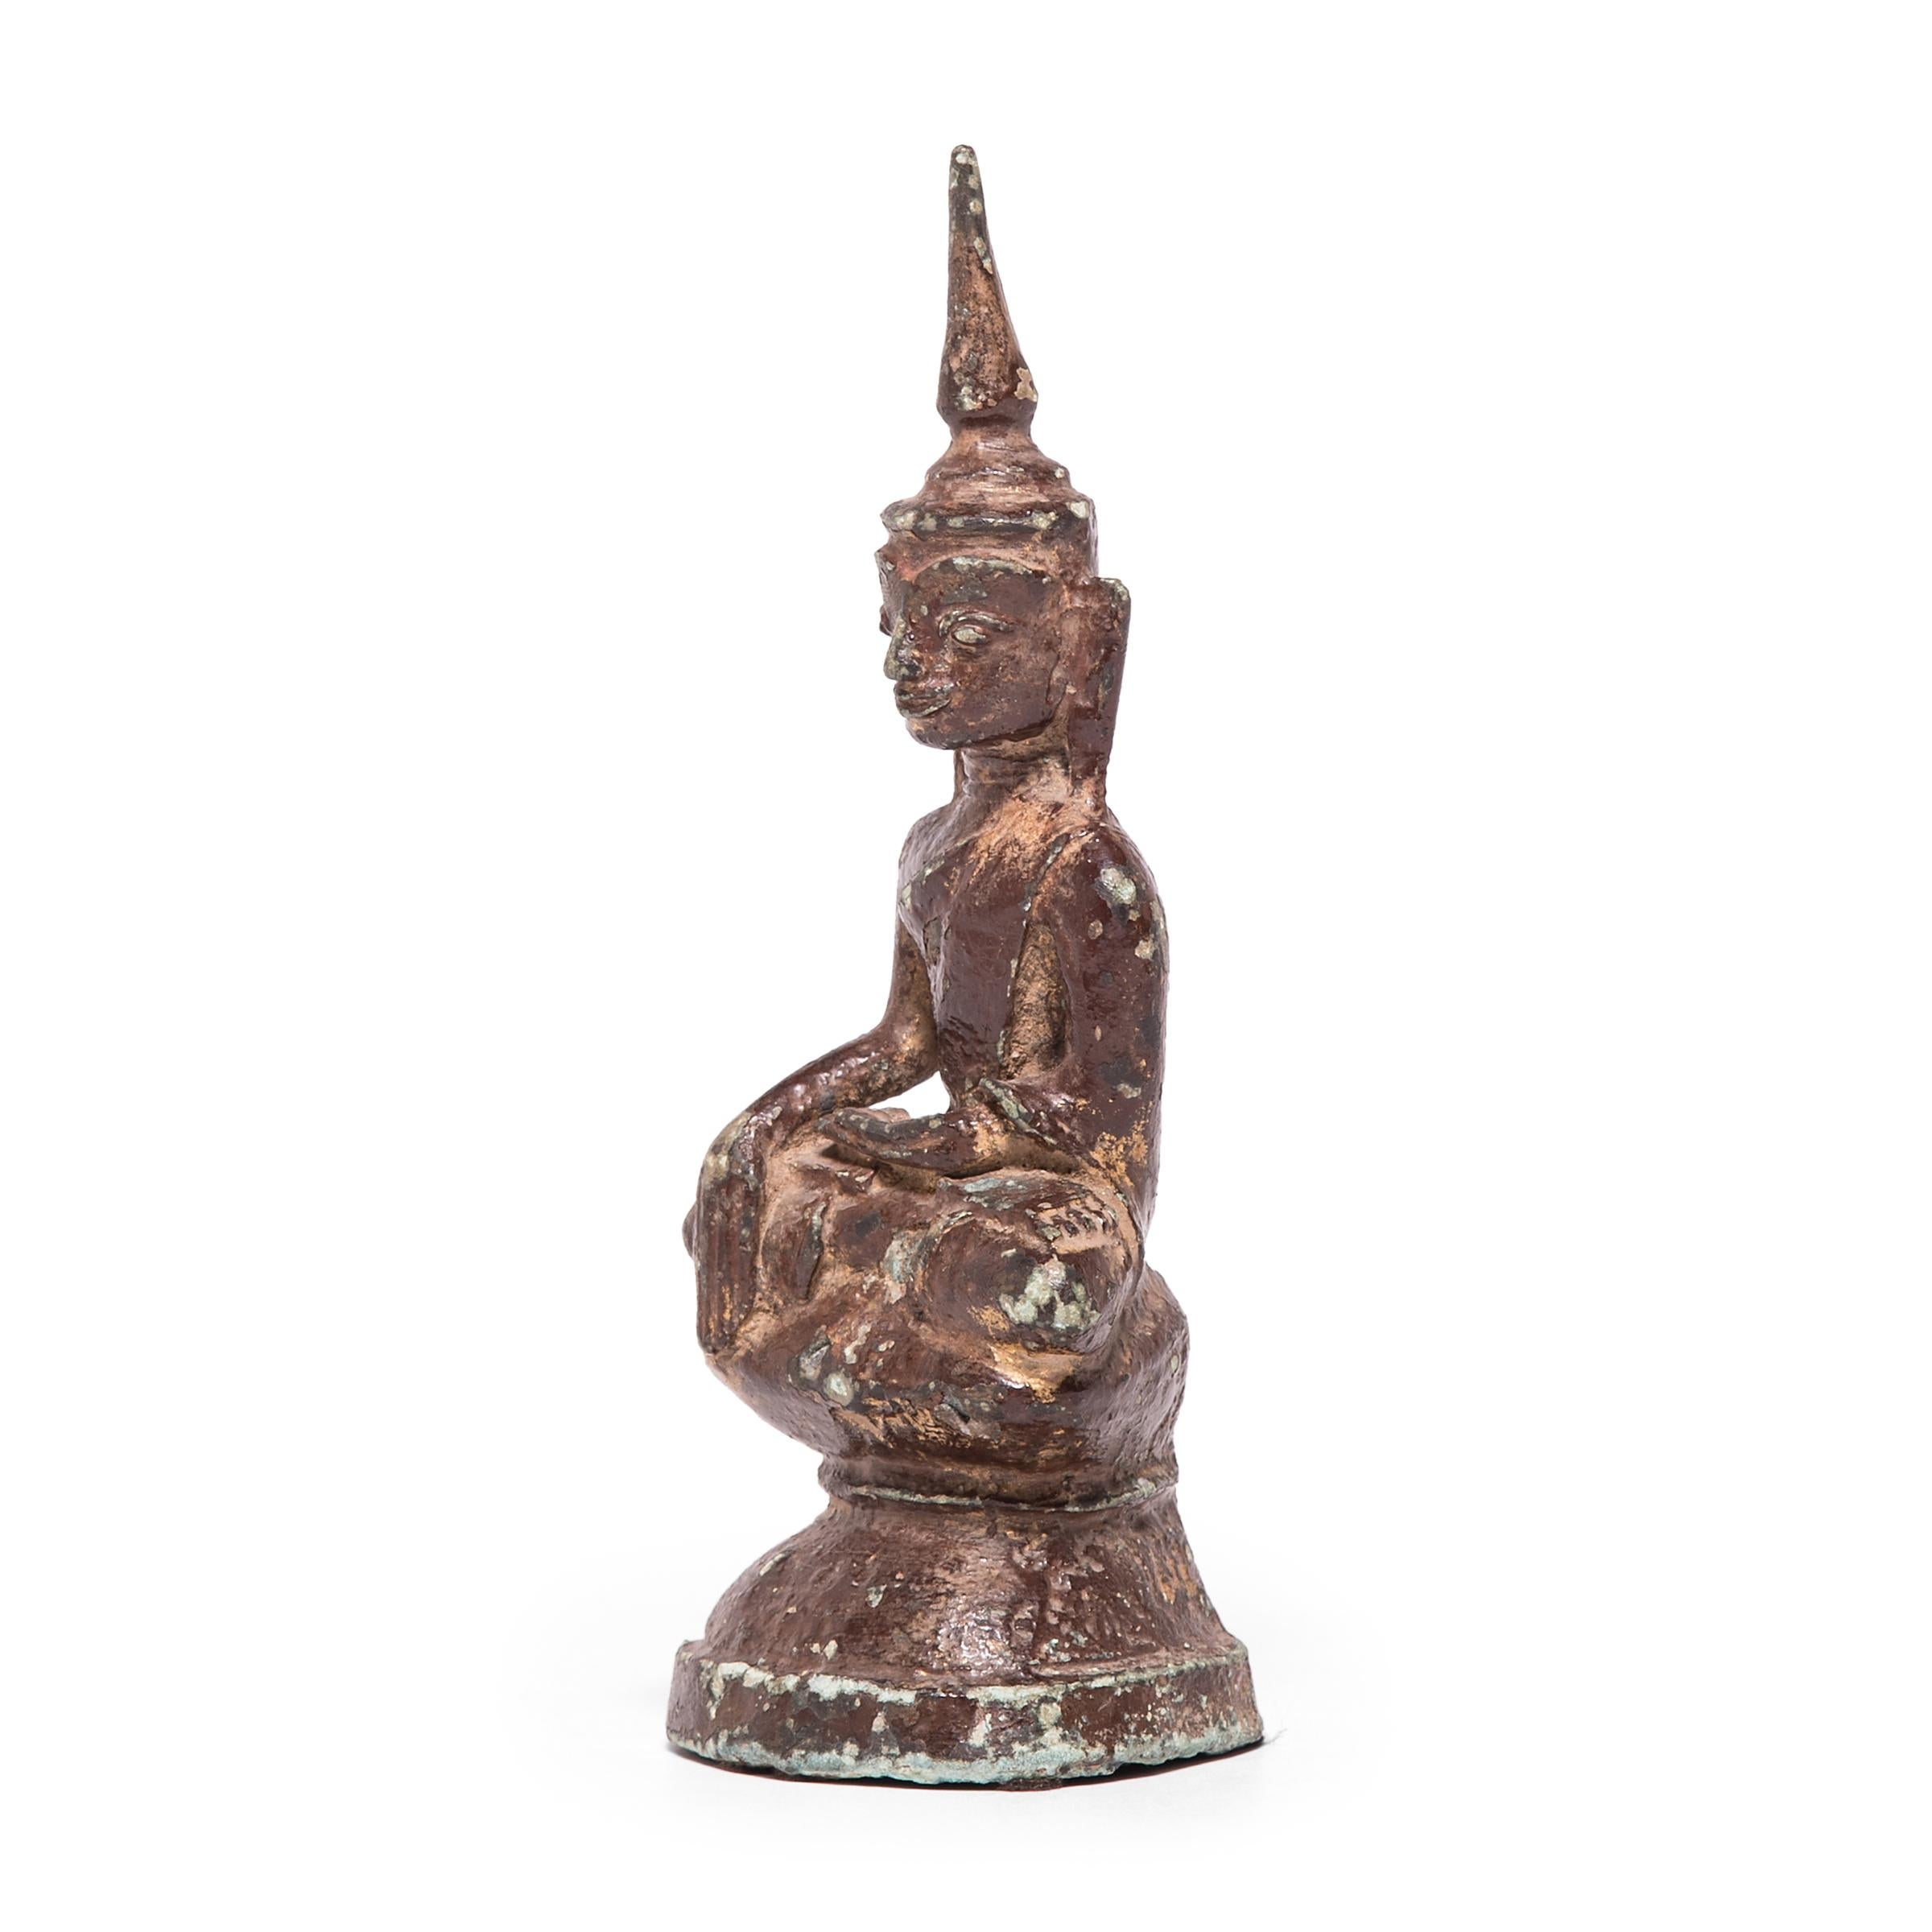 This serene Buddha figure was cast in bronze by a Thai artisan over a century ago.The flame-like spike stretching upward from the crown of his head is called an ushnisha—it signifies wisdom, and is one of the 32 marks of the Buddha’s greatness. Many